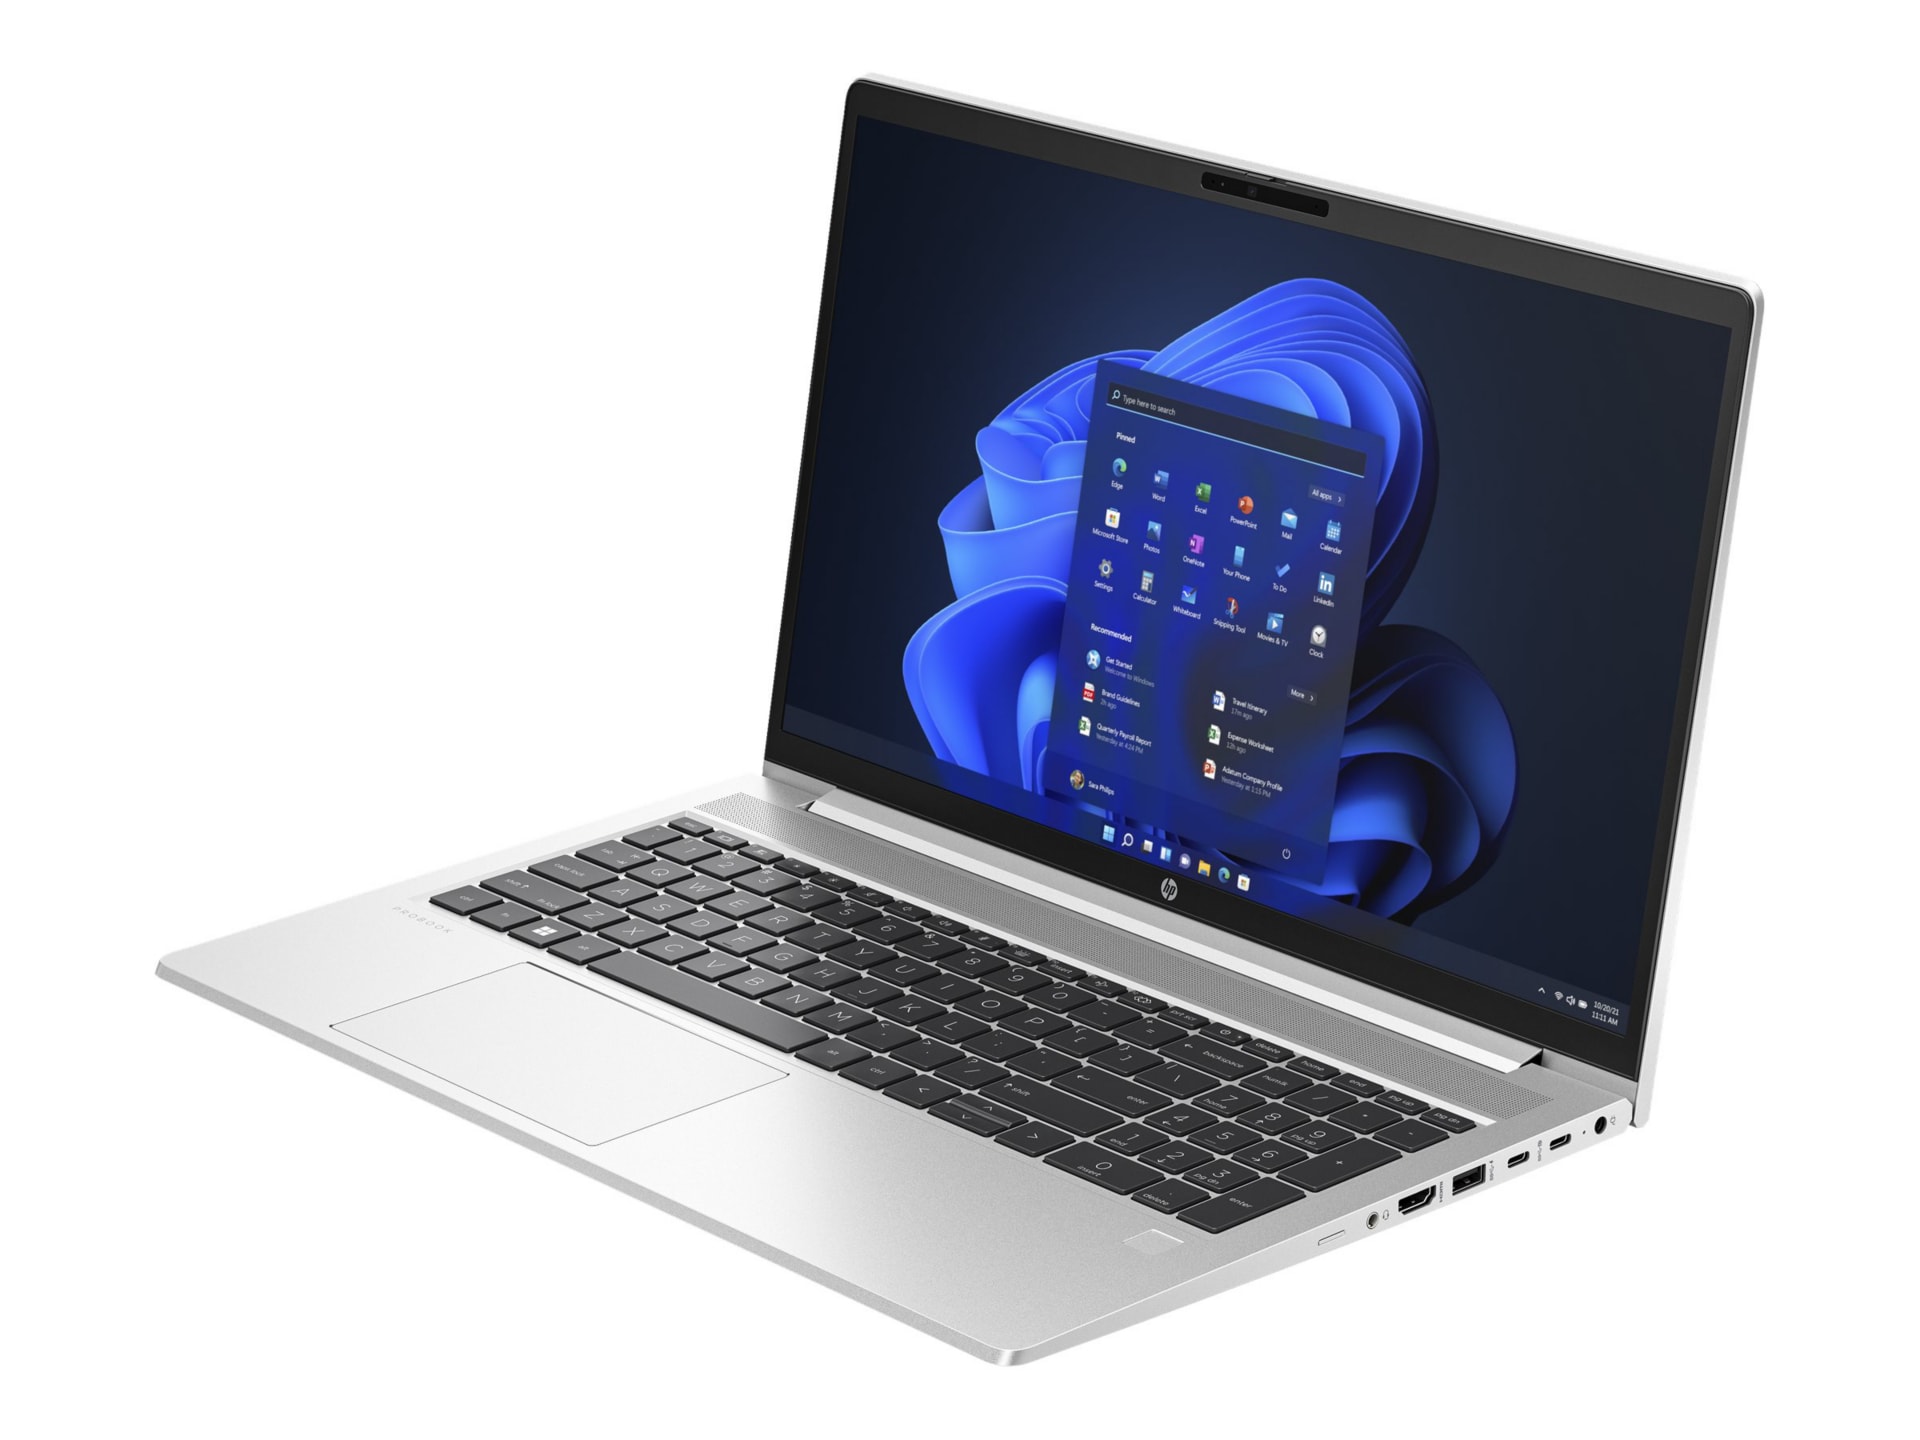 HP ProBook 450 G9 reviewed: 15.6-inch laptop features long battery